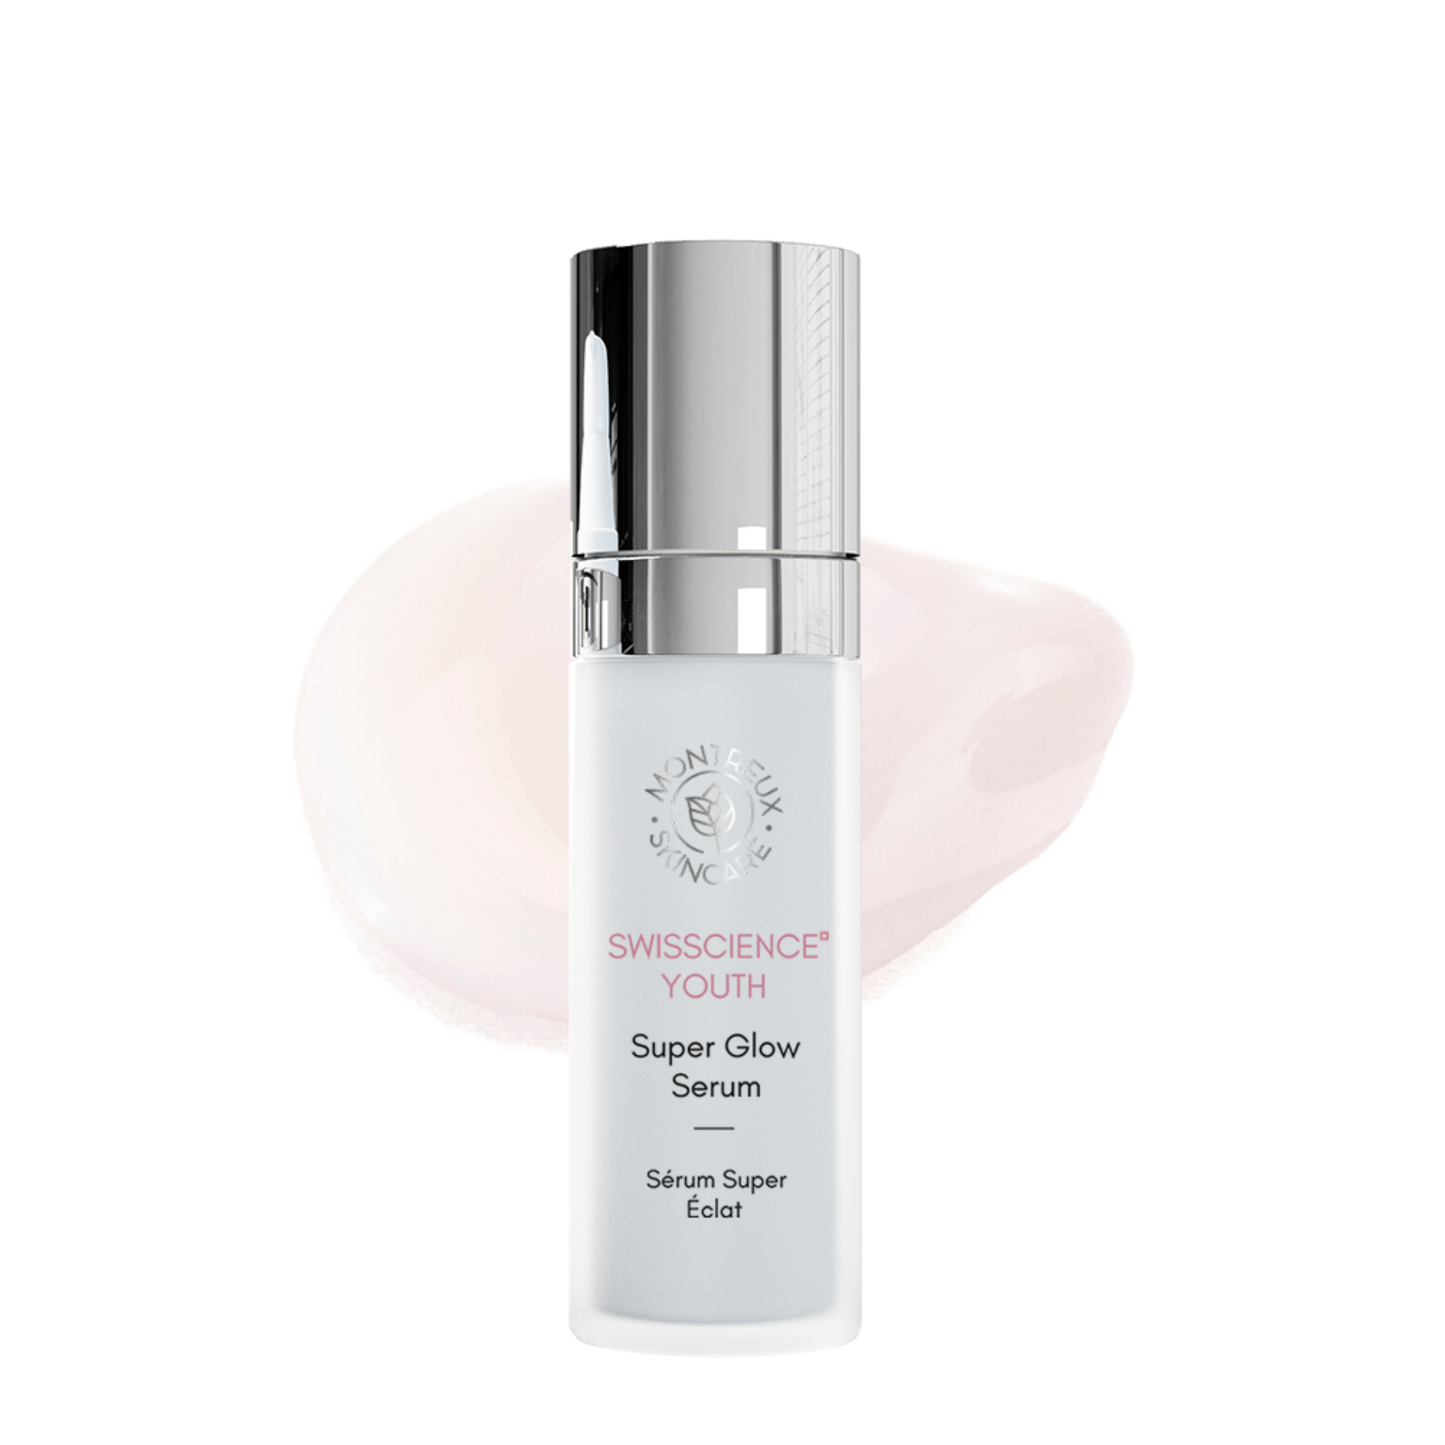 Product picture of the Super Glow Serum of the brand Montreux Skincare created with Narcissus flower  with Narcissus flower with a drop of its creamy and soft texture behind